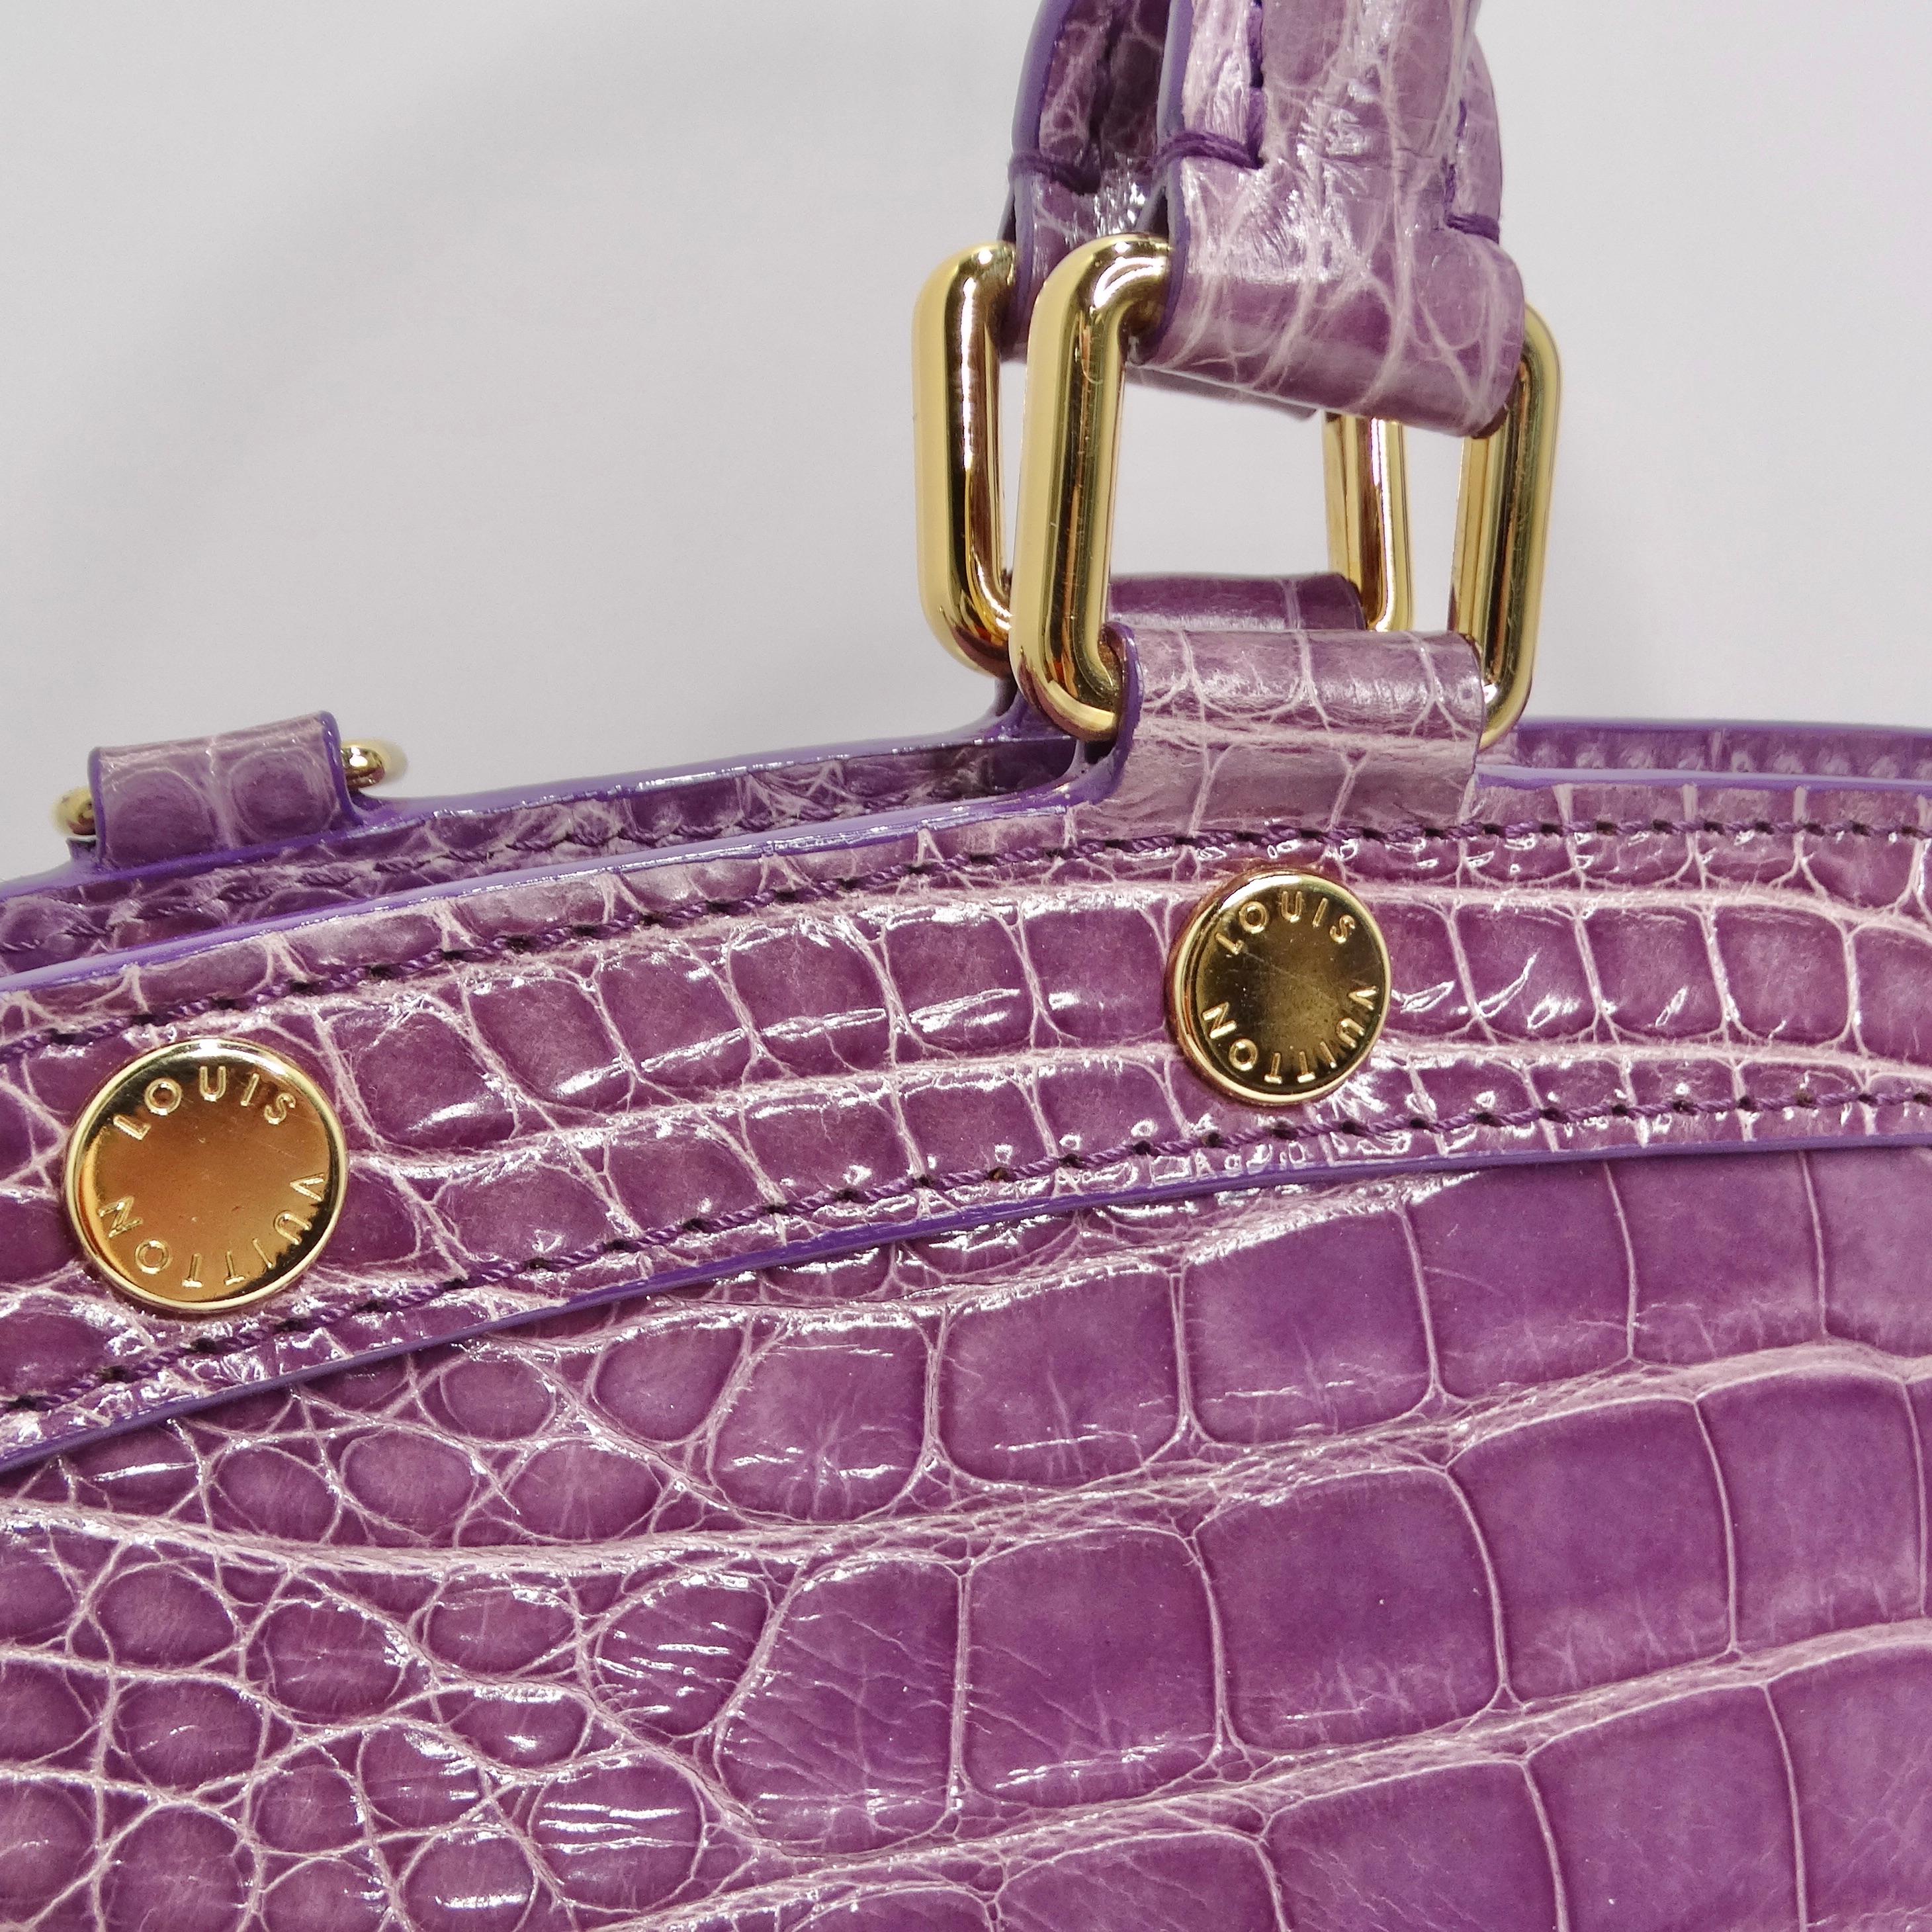 This is the most iconic and beautiful piece to add to your collection! A bag made to make a statement! This bag is vintage, made in 2001, and is perfect for the Louis Vuitton collector. It is featured in a beautiful and subtle but brilliant purple